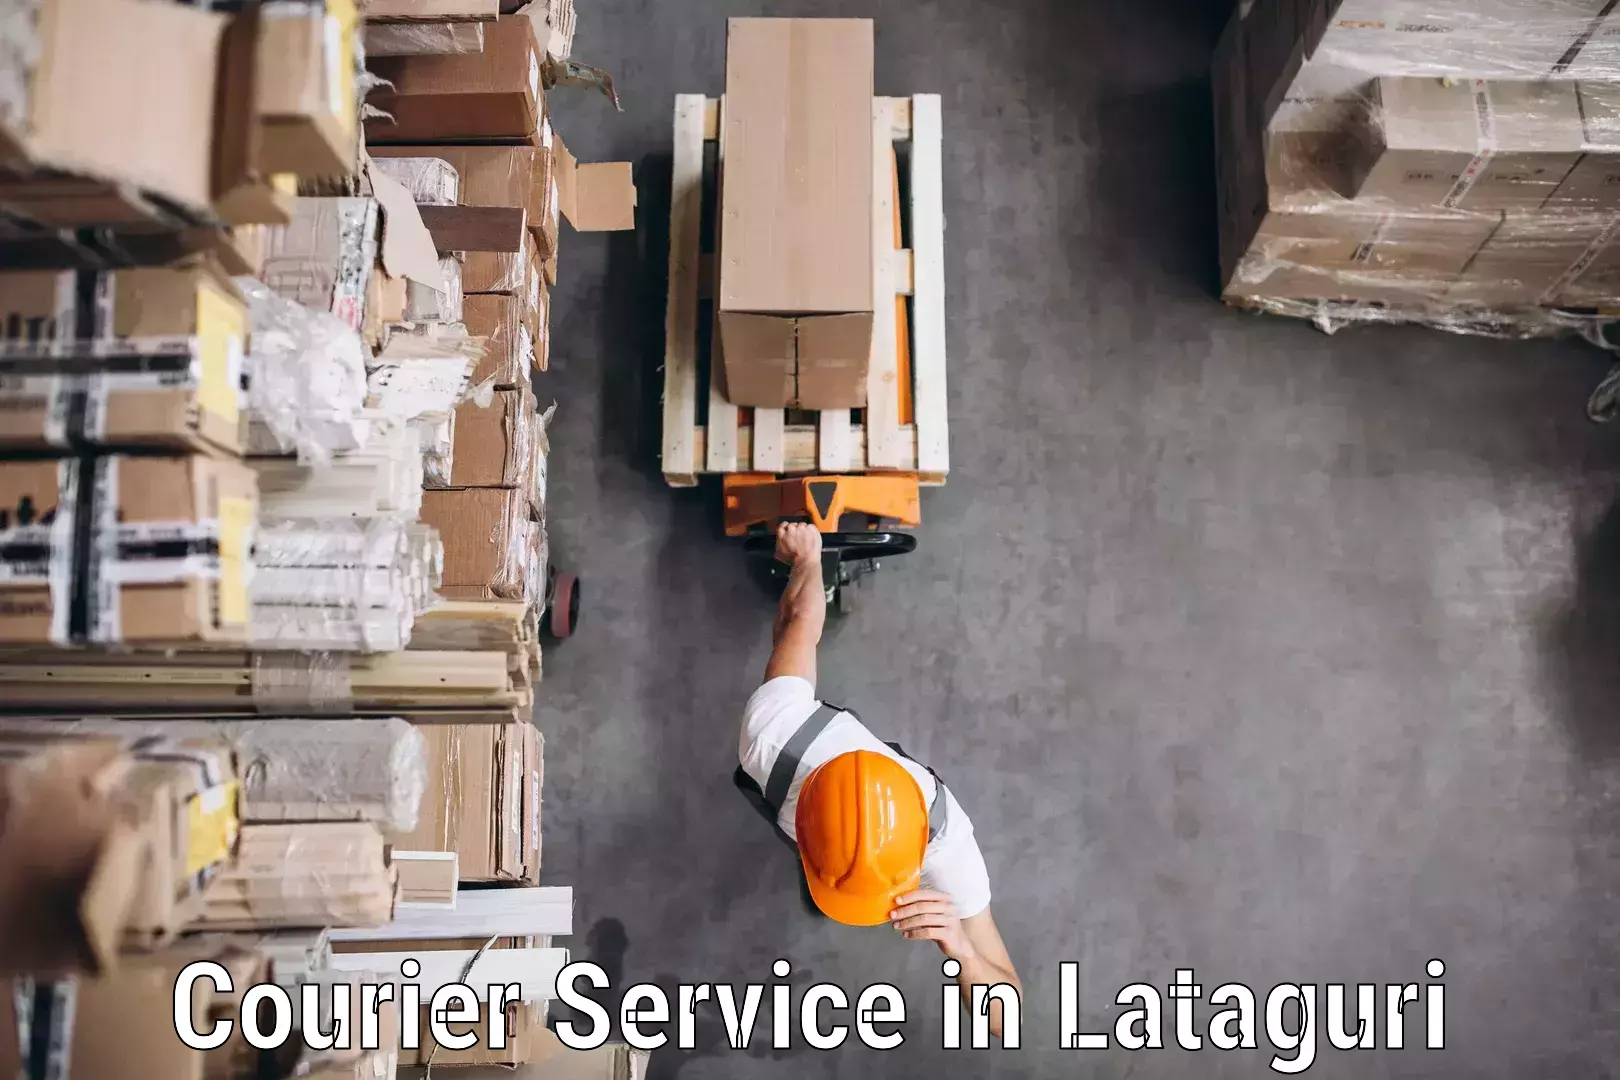 Modern delivery methods in Lataguri